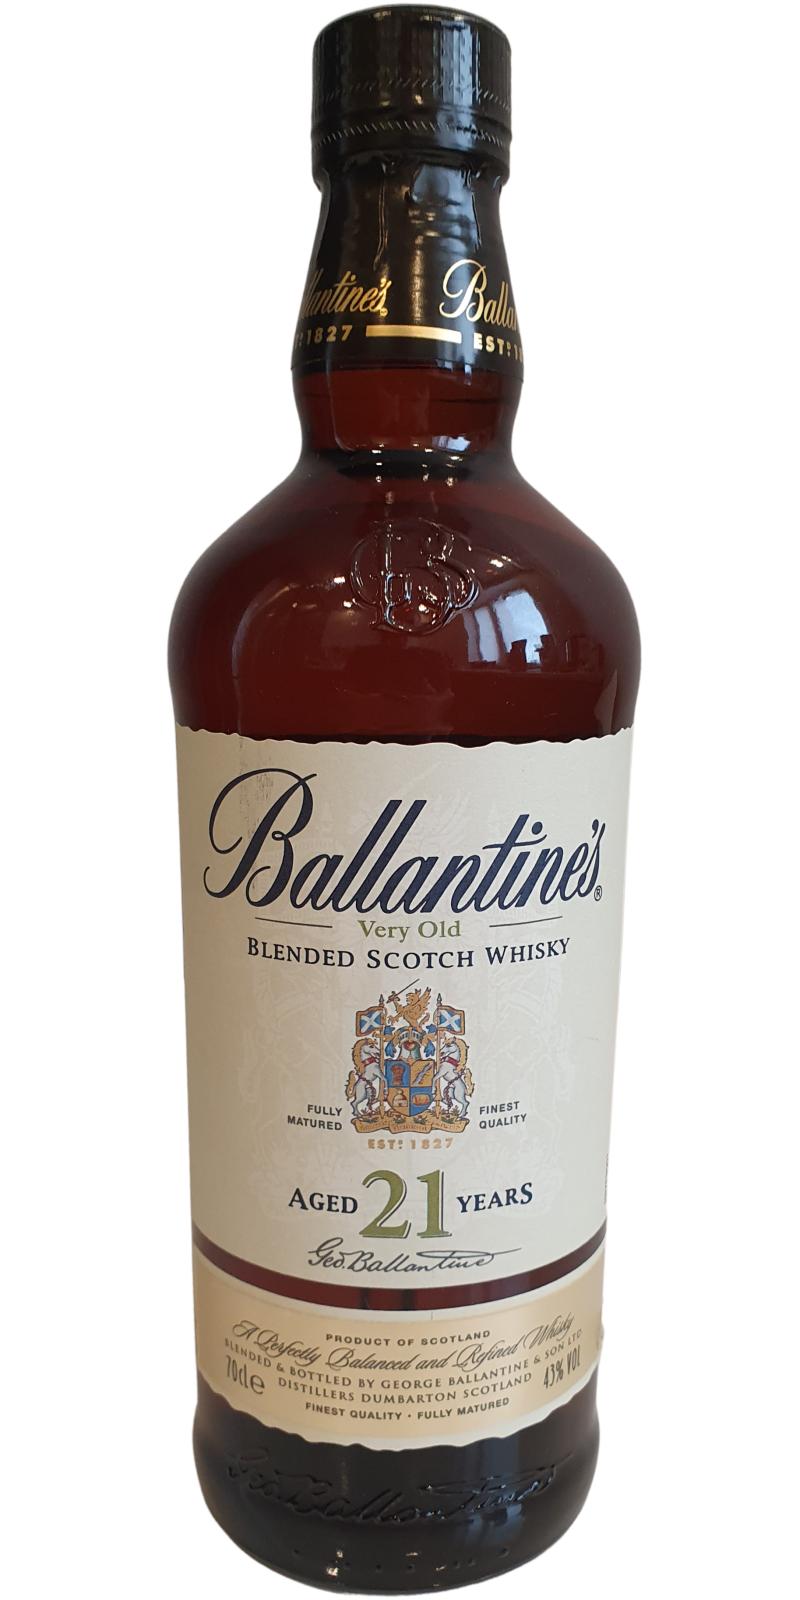 Ballantine's 21-year-old - Value and price information - Whiskystats